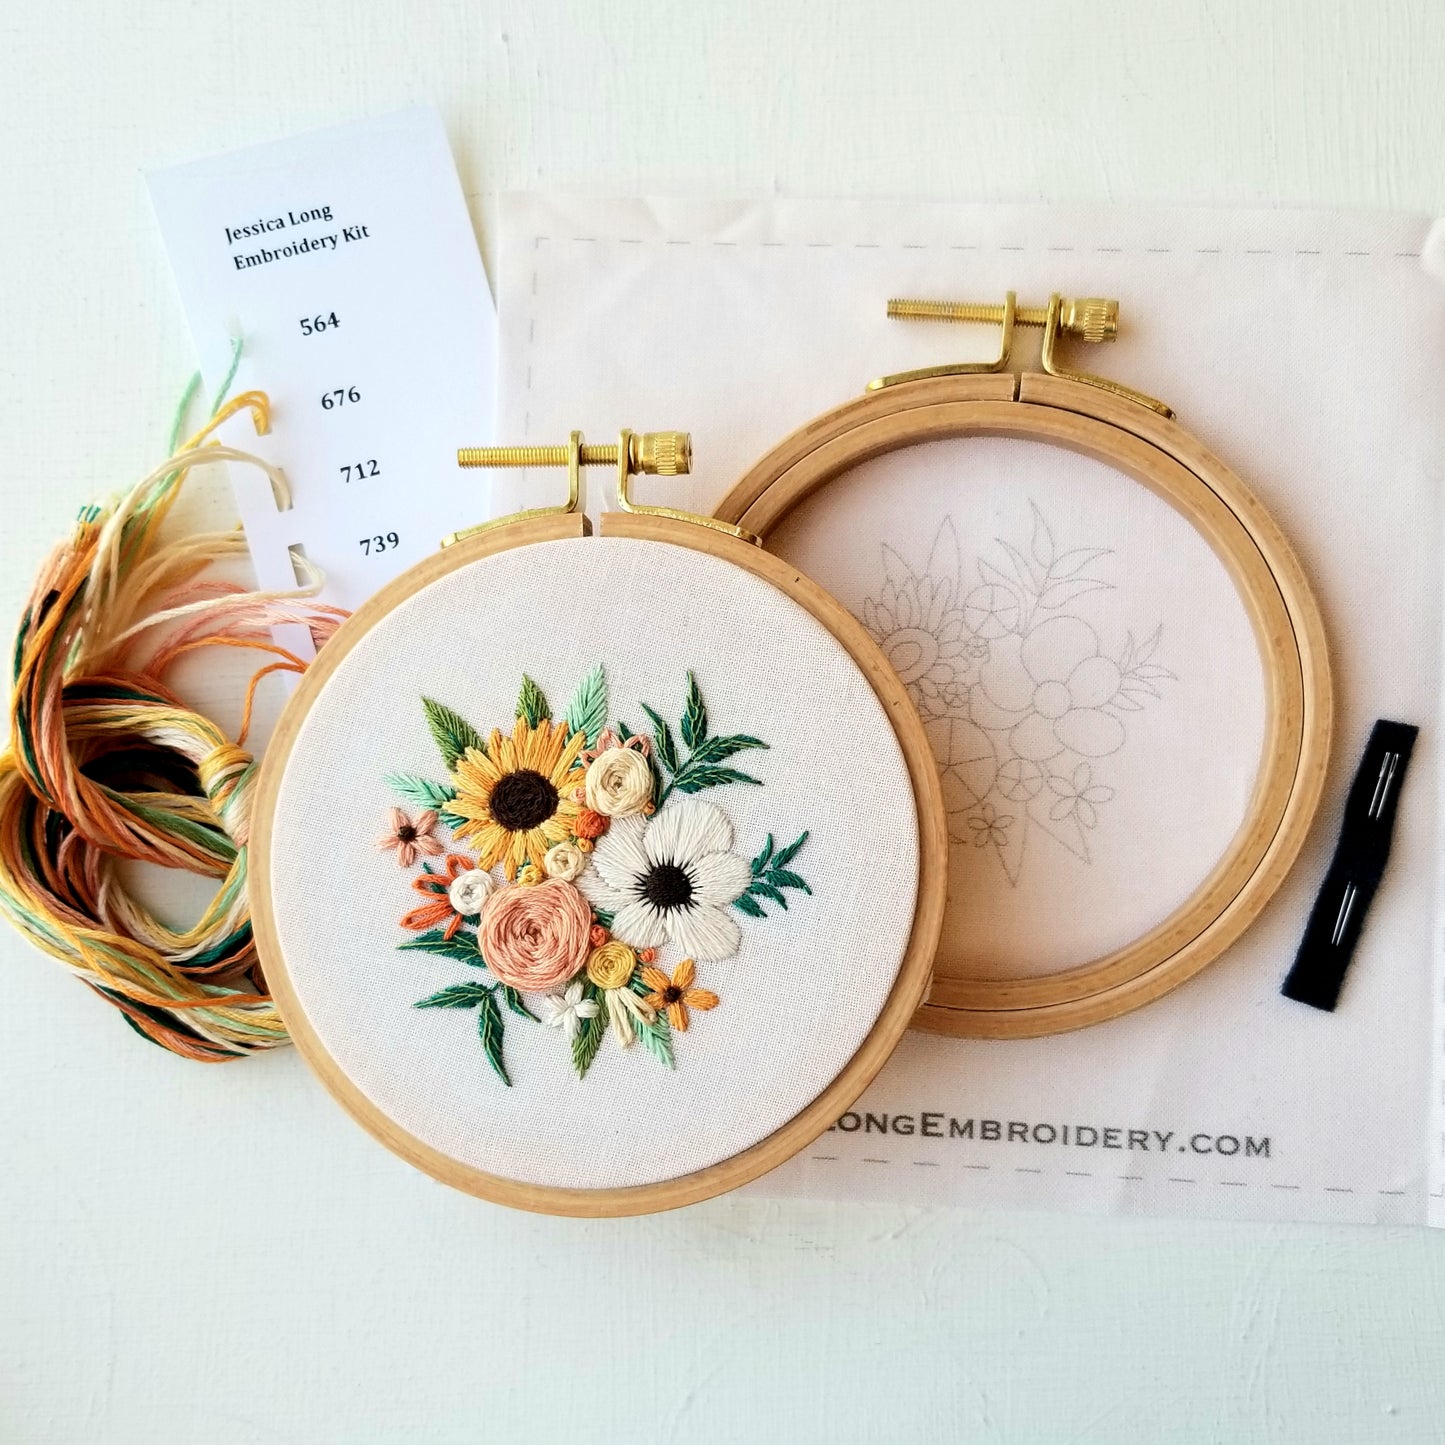 Floral Harvest Embroidery Kit – Jessica Long Embroidery